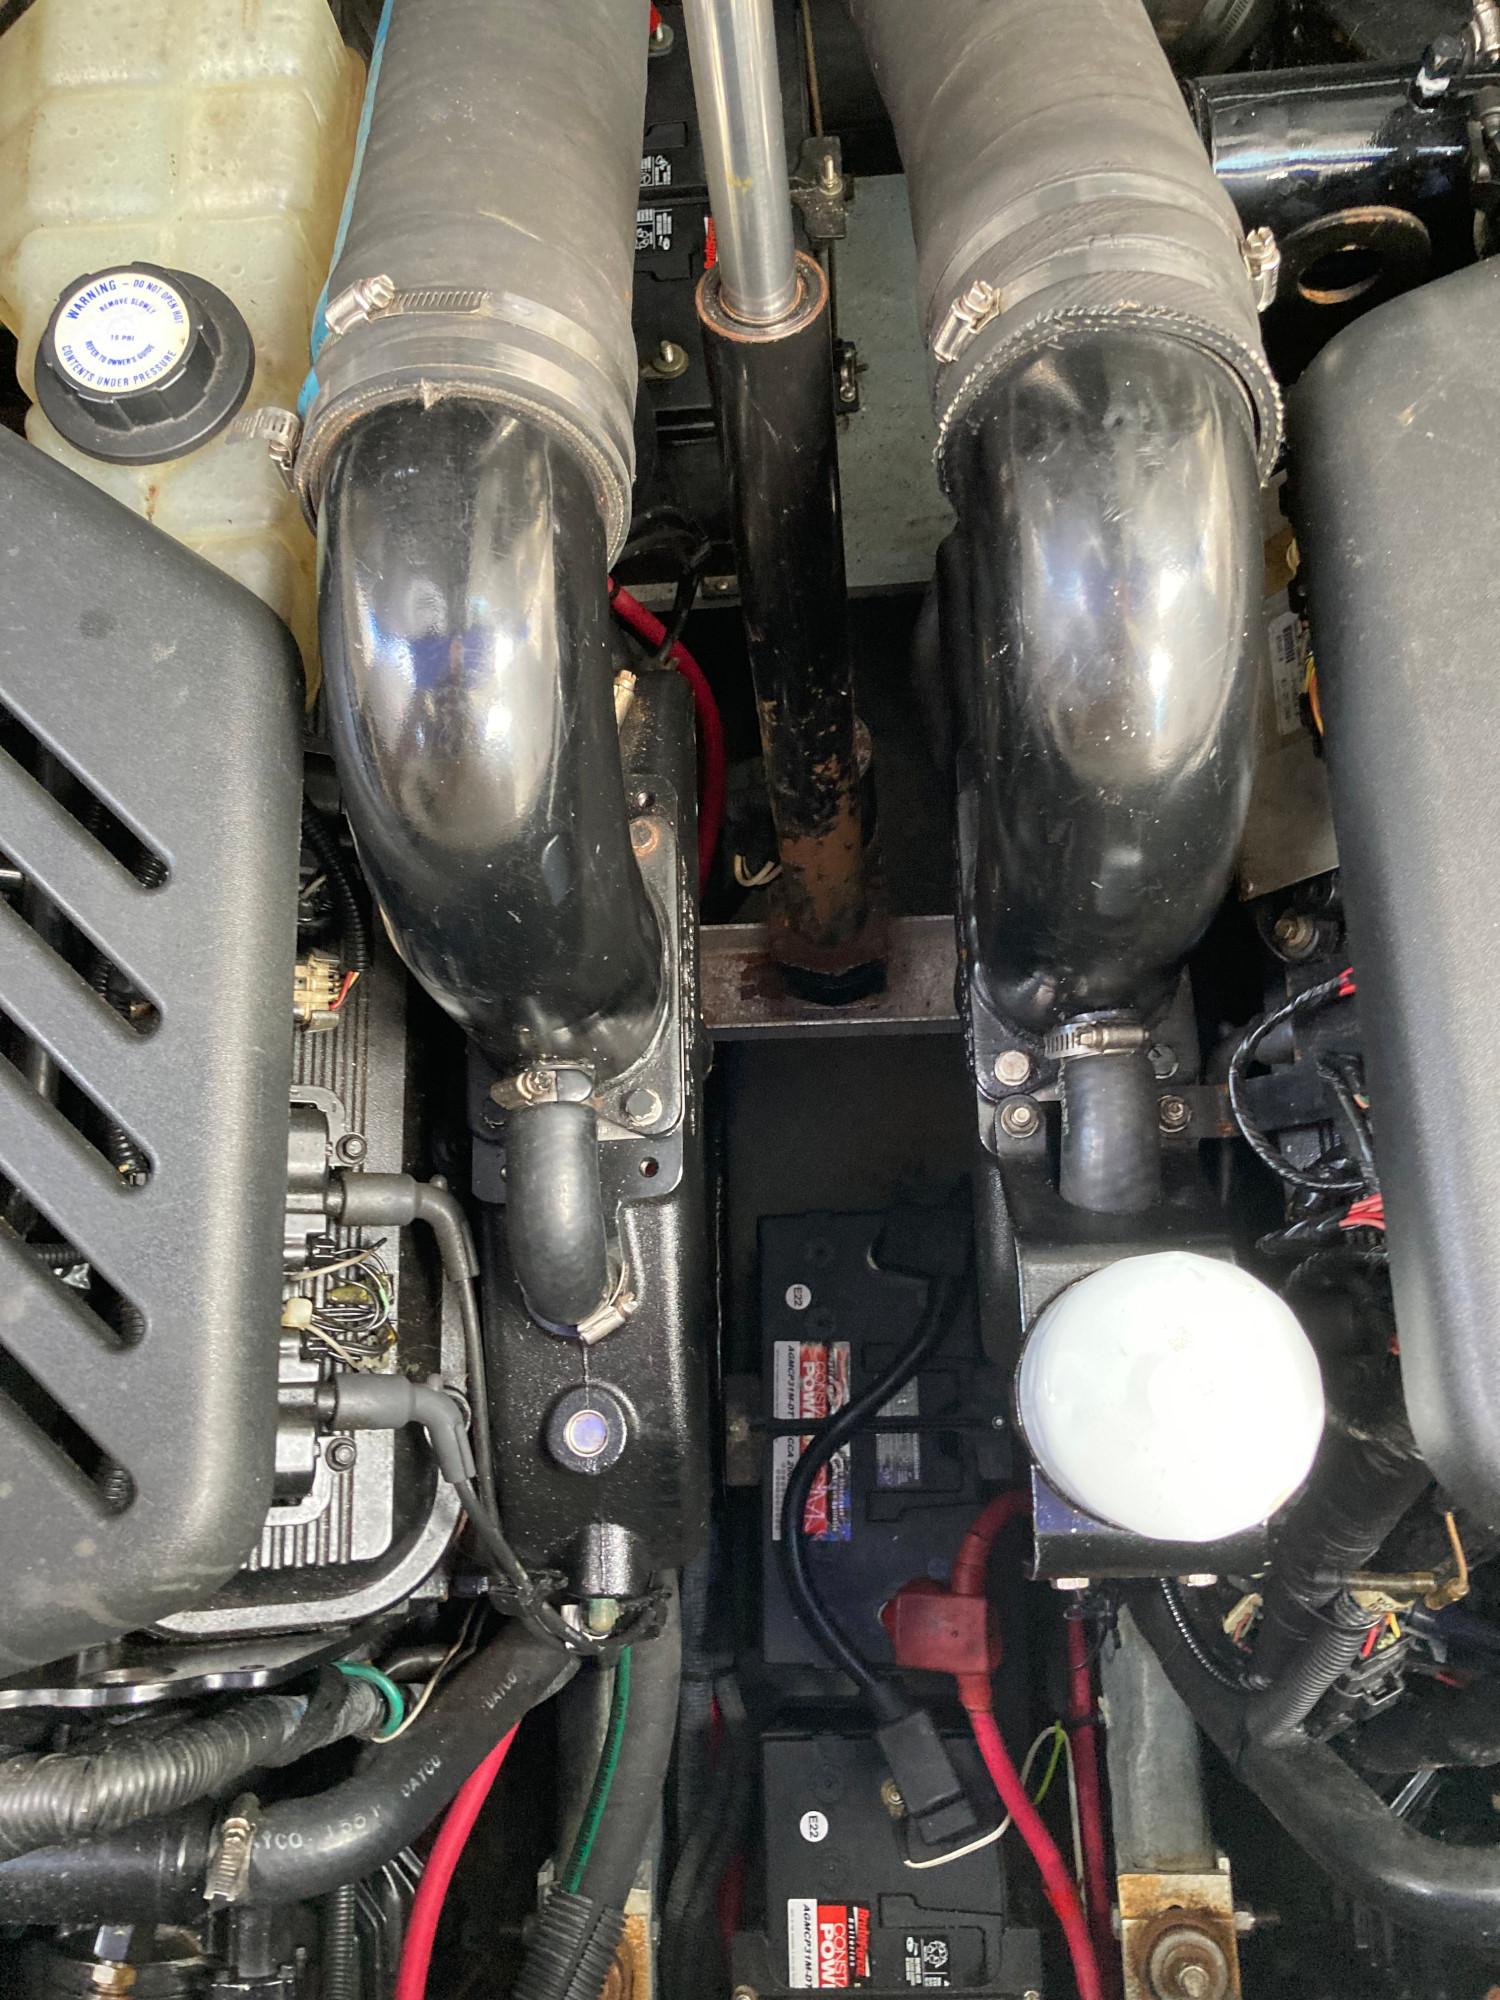 New Oil coolers, Manifolds & Heat Exchangers